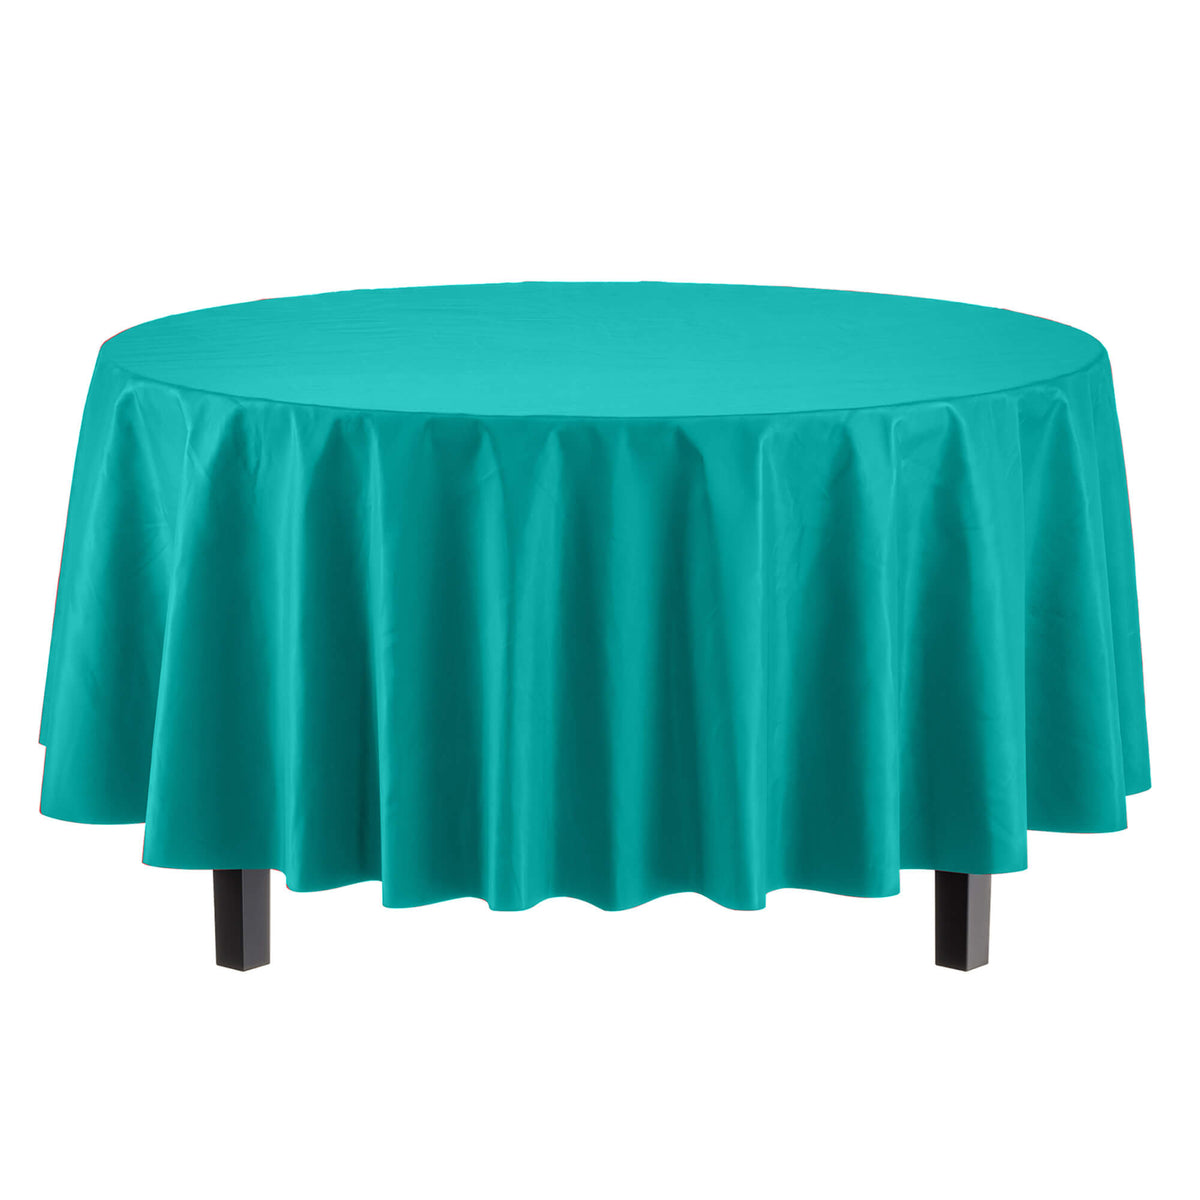 Round Teal Table Cover